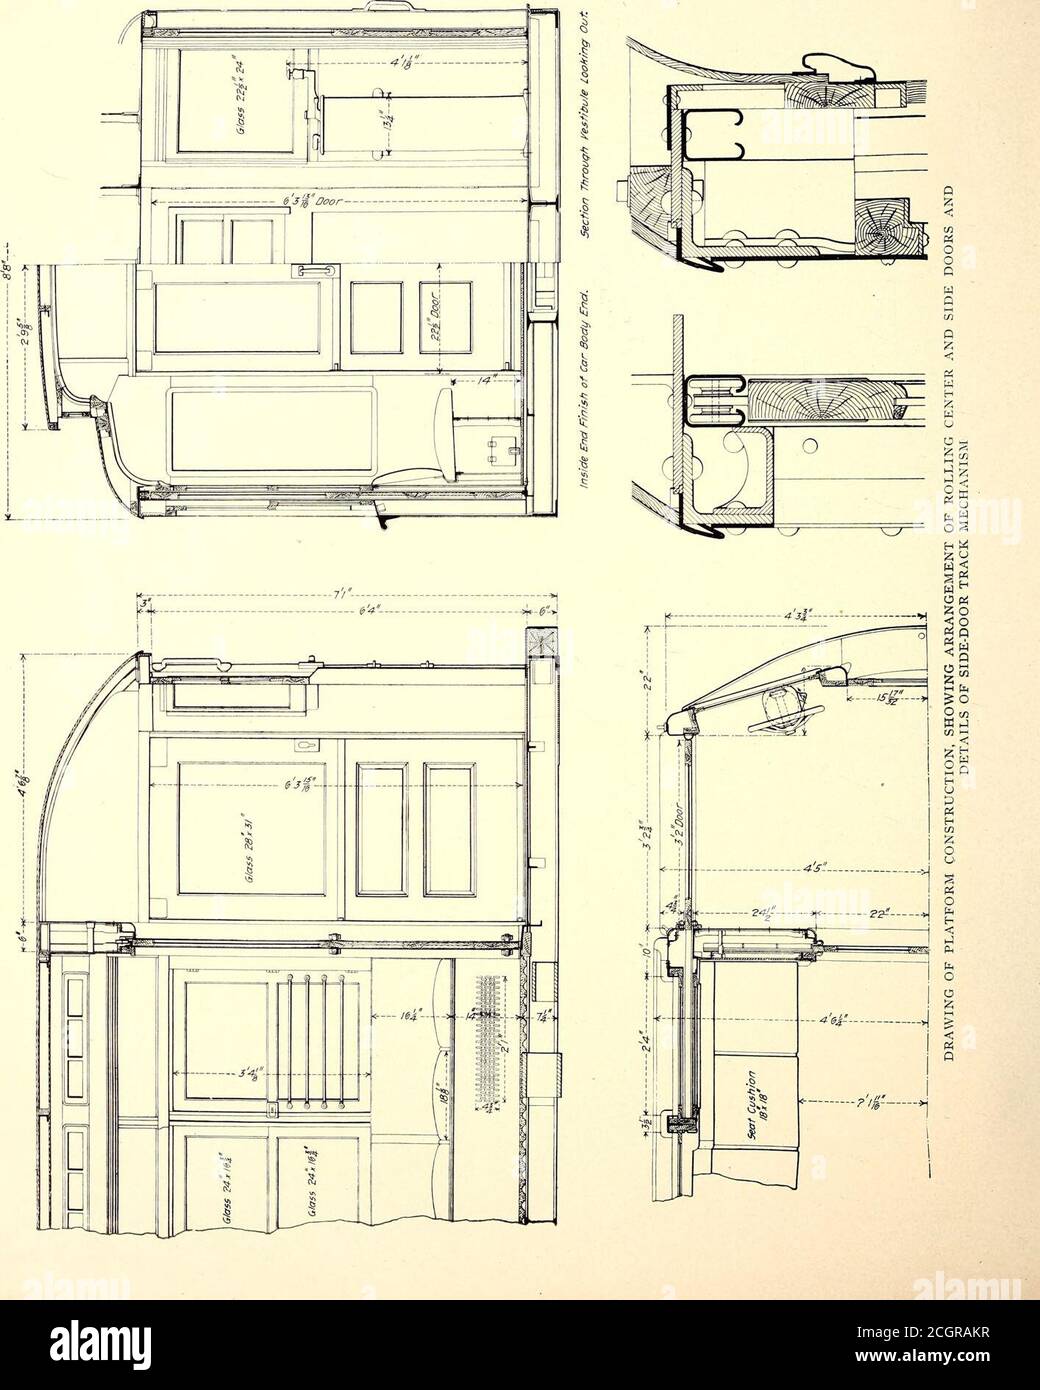 . The Street railway journal . r matting, which is cemented uponthe steel plate. Special threshold metal treads arc provided atthe passageways between car and platform. Those at the sideand end vestibule door openings are the well-known safety 644 STREET RAILWAY JOURNAL. (Vol. XXIV. No. ig. freads of the American Mason Safety Tread Company, Bos-ton, Mass. FINISH The outside finish of the car is applied by the steel plate ofthe side-frame girder construction, upon which the paint finishof Tuscan red is applied. Similar sheathing of special rolledsteel plate is applied to the car ends and platfo Stock Photo